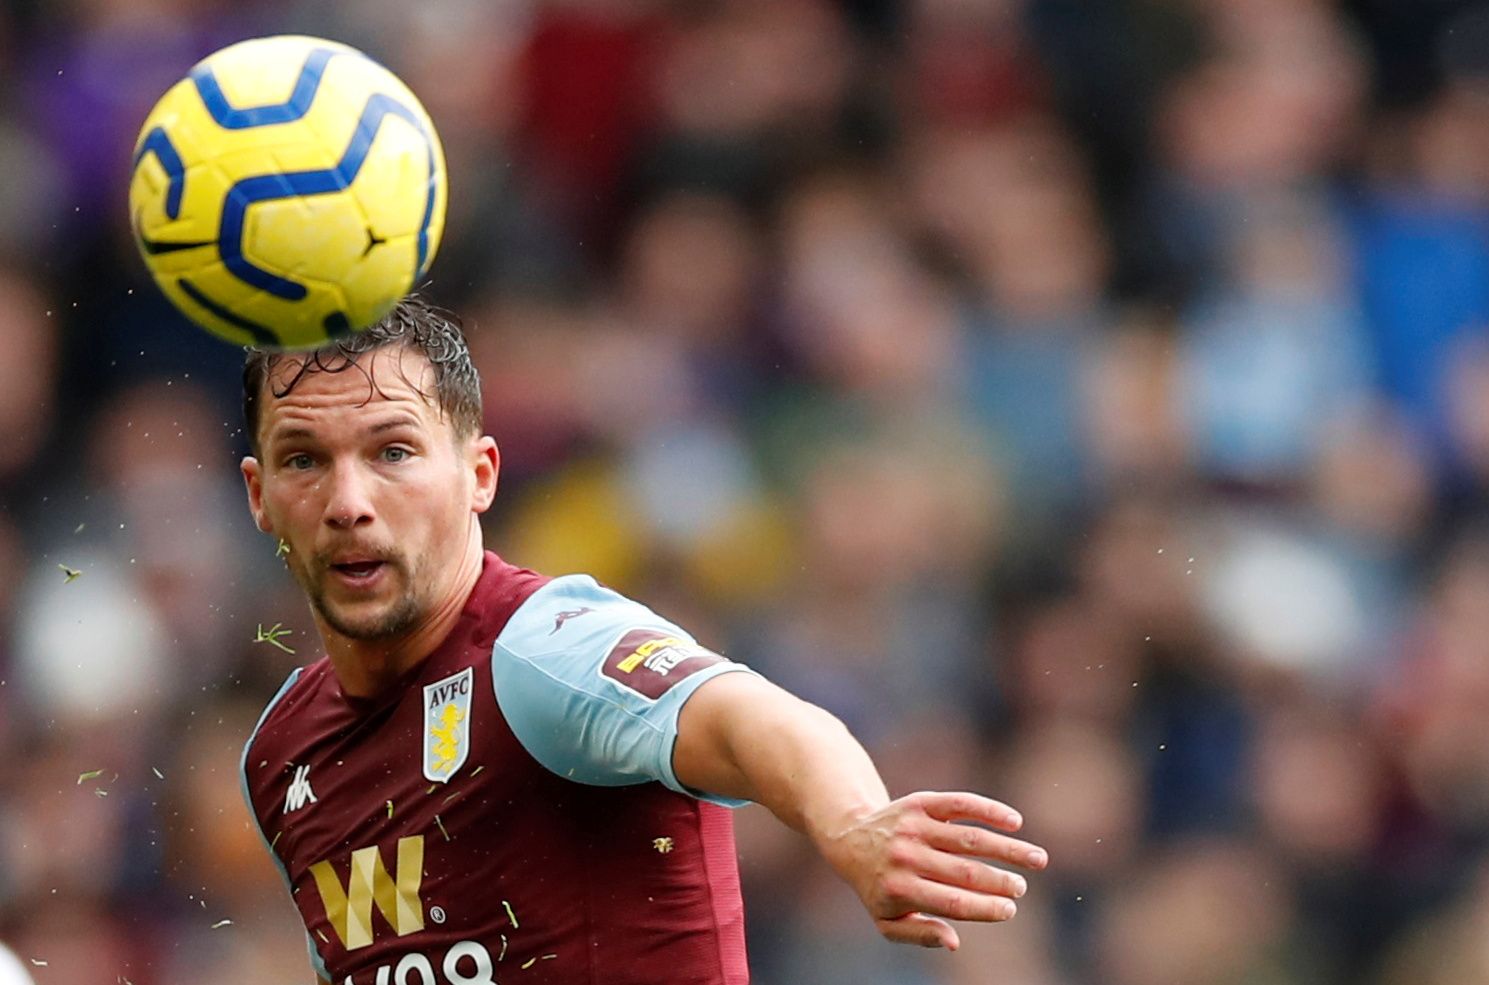 Soccer Football - Premier League - Aston Villa v Tottenham Hotspur - Villa Park, Birmingham, Britain - February 16, 2020  Aston Villa's Danny Drinkwater in action  Action Images via Reuters/Andrew Boyers  EDITORIAL USE ONLY. No use with unauthorized audio, video, data, fixture lists, club/league logos or 